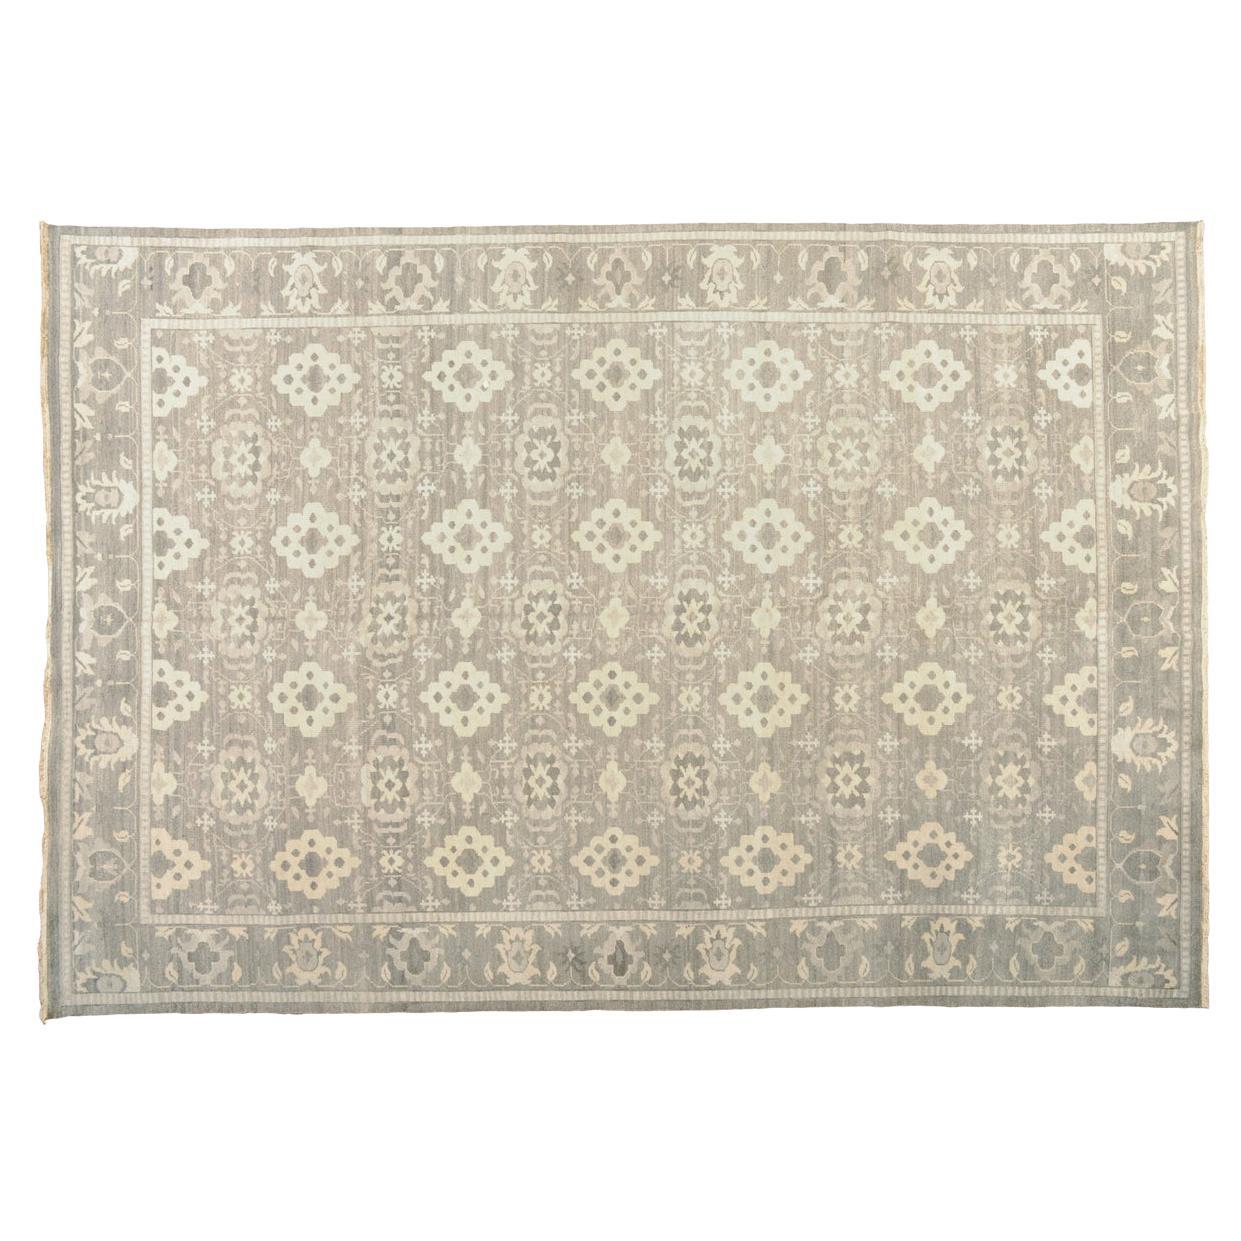 Hand-Knotted Indian Rugs